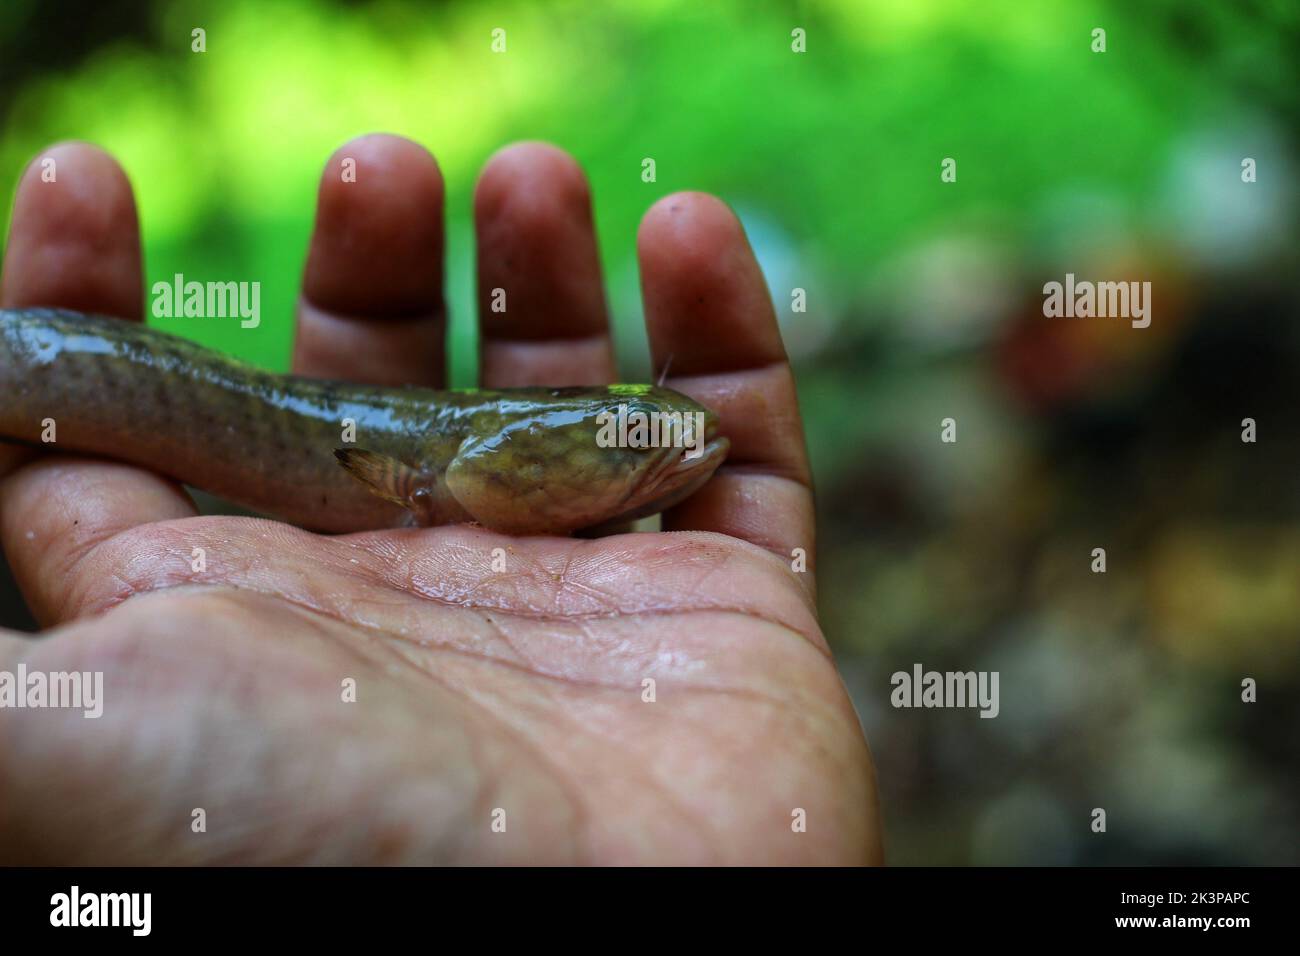 A closeup of a striped or chevron snakehead on a person's hand palm against a blurred green background Stock Photo